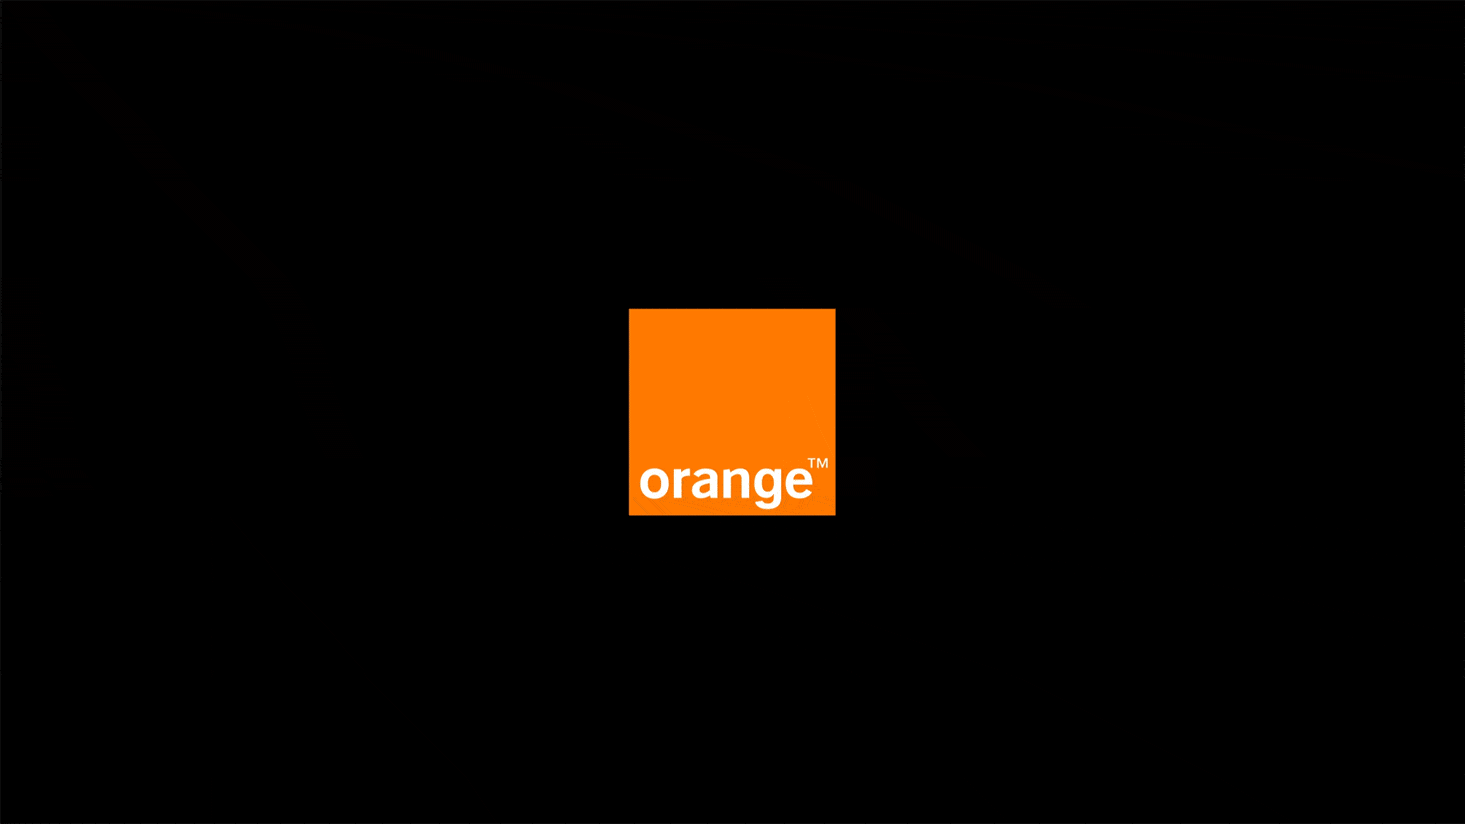 animated comparison between Orange's main and small logo